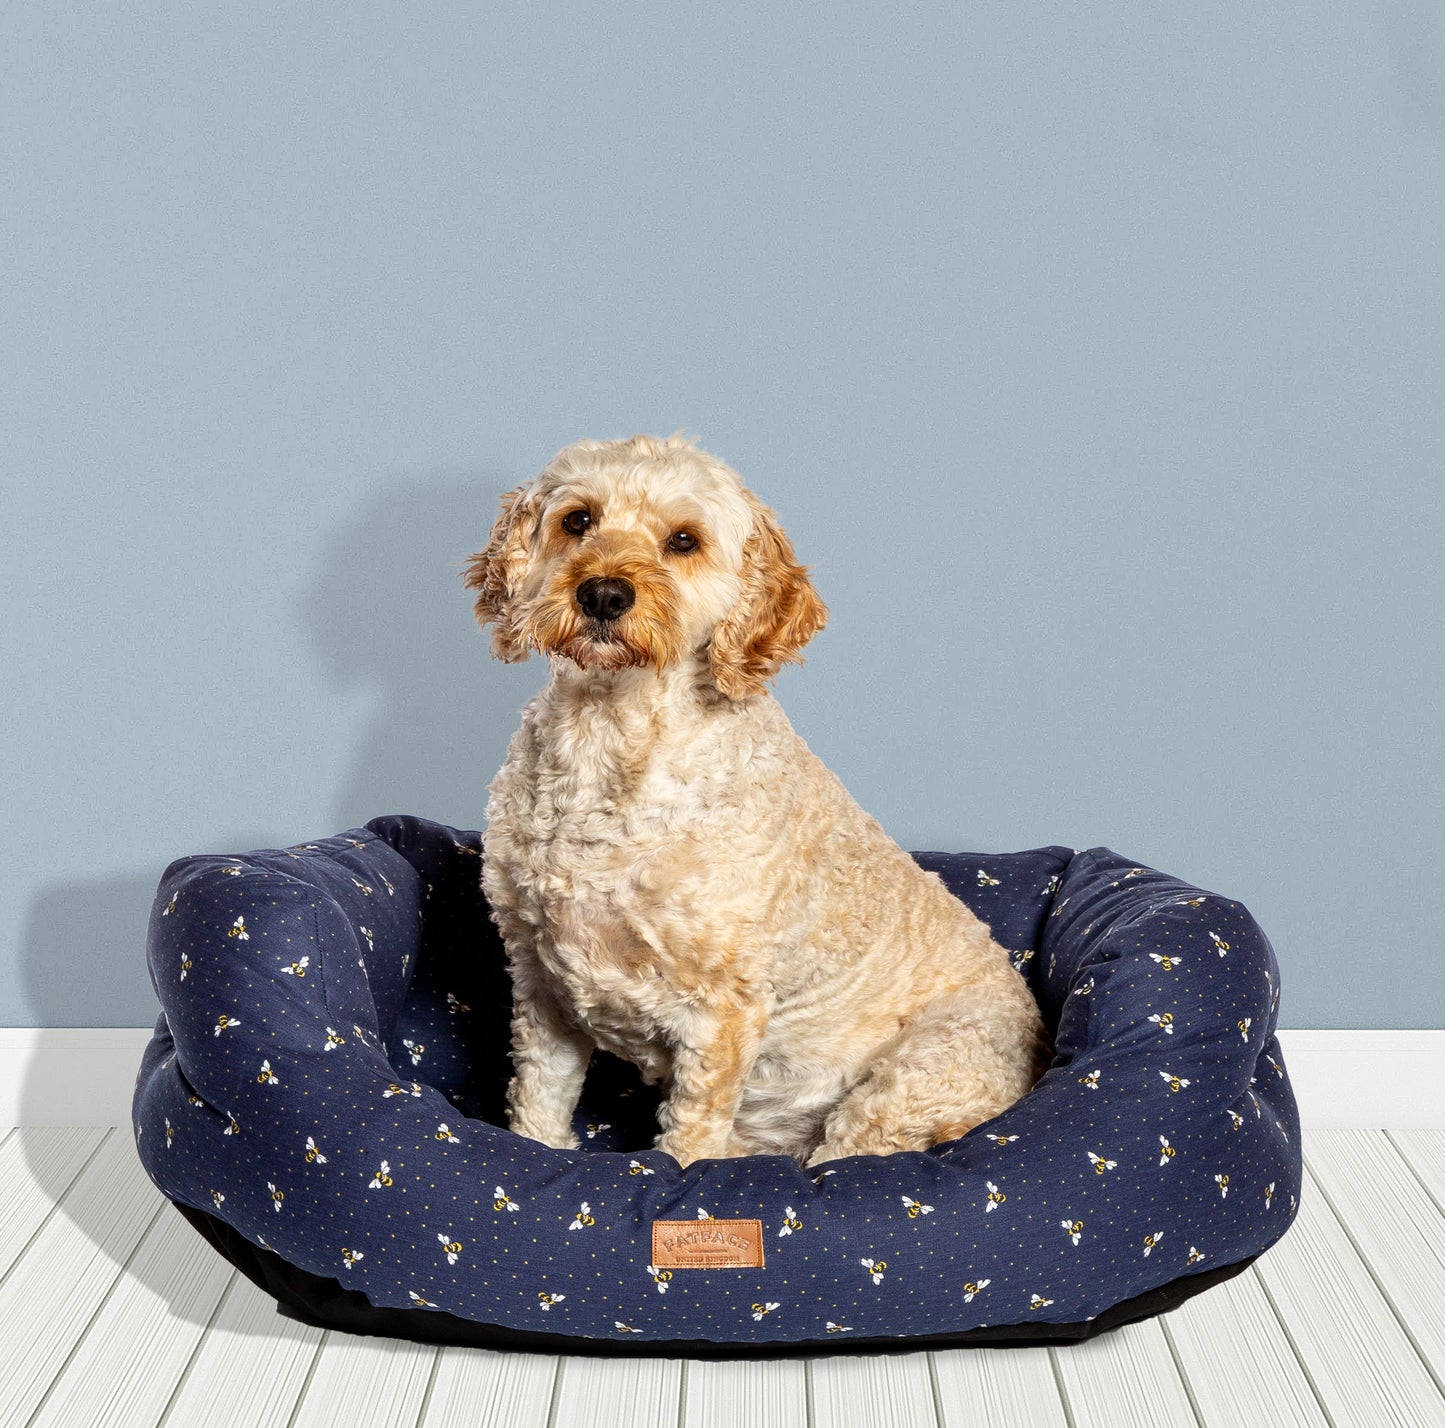 Spotty Bees Deluxe Slumber Dog Bed by FatFace